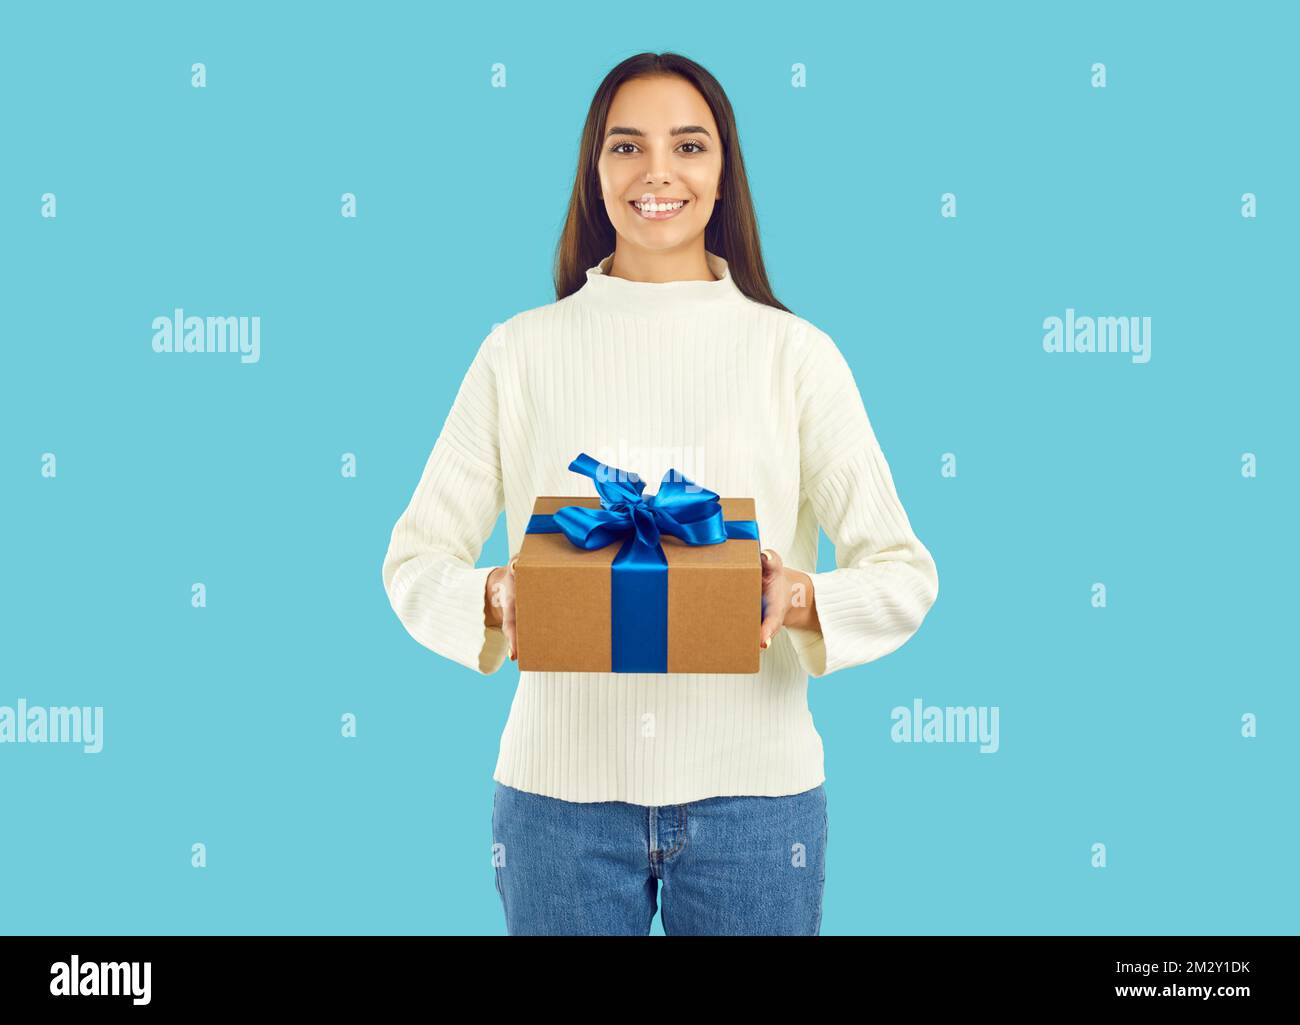 Studio portrait of happy beautiful young woman holding gift box with Christmas present Stock Photo